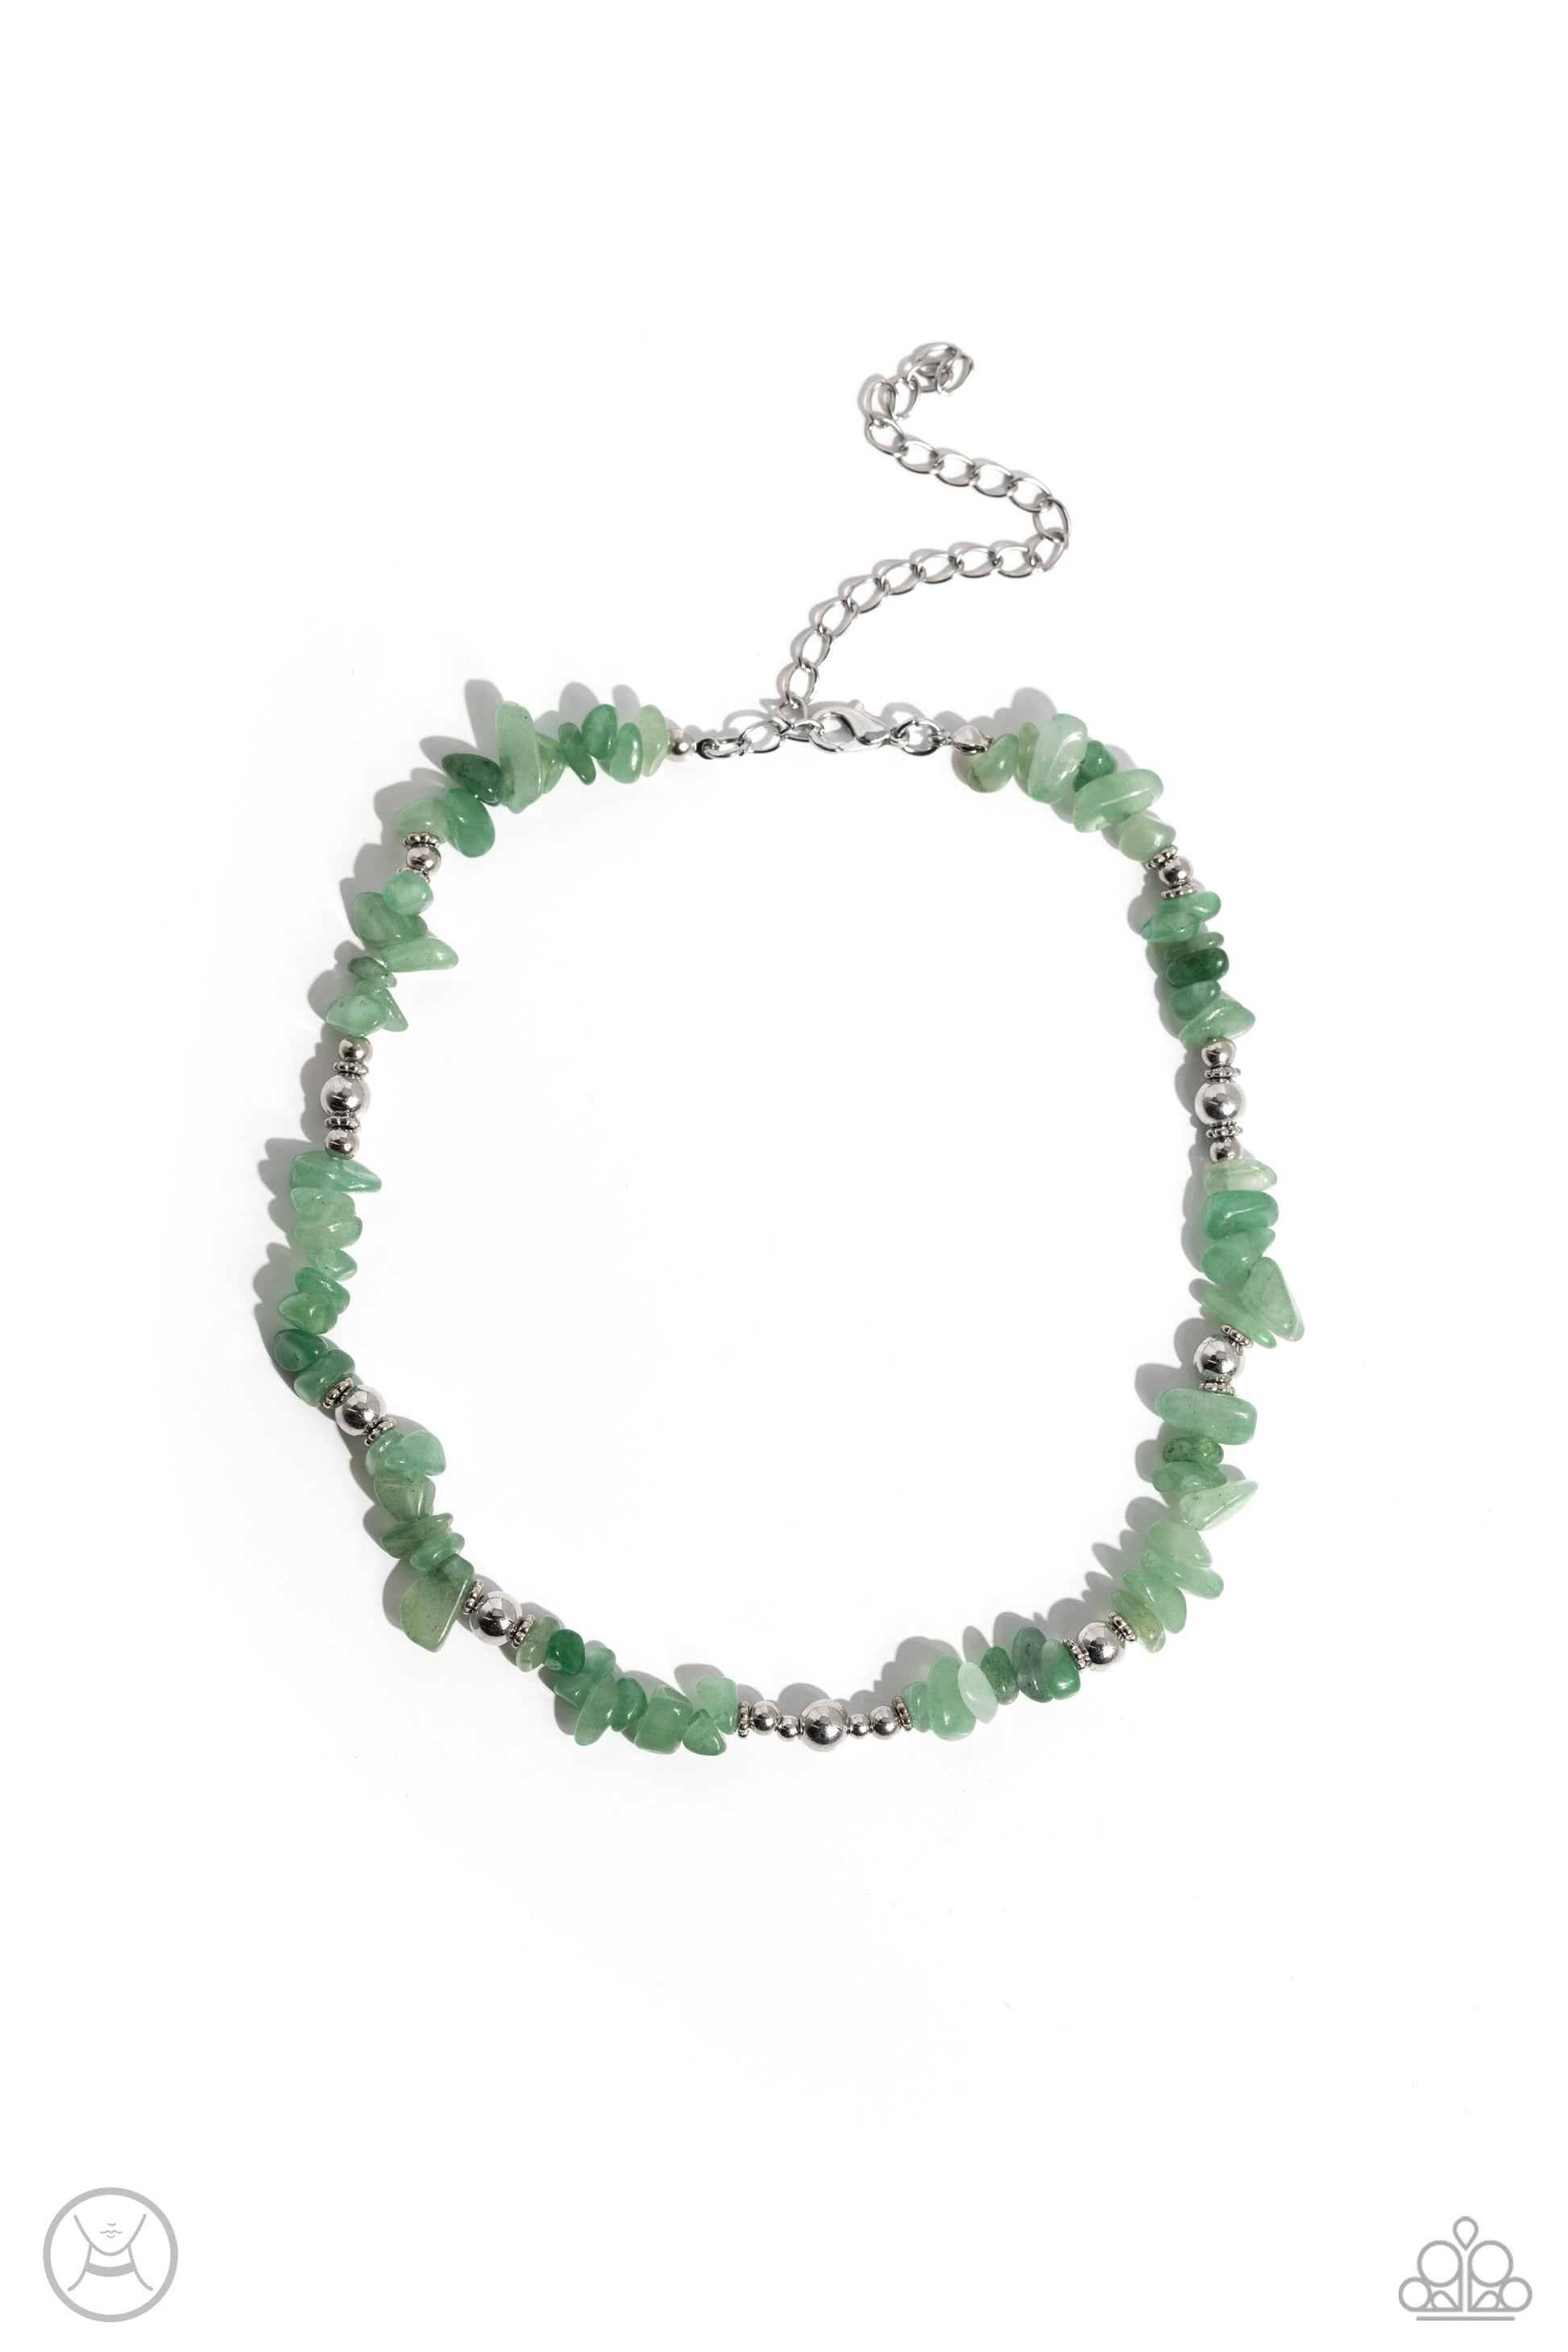 Paparazzi Accessories - Carved Confidence - Green Necklaces infused along an invisible string, a chiseled collection of jade stones and various silver beads wrap around the collar for an earthy pop of color. Features an adjustable clasp closure. As the stone elements in this piece are natural, some color variation is normal.  Sold as one individual choker necklace. Includes one pair of matching earrings.